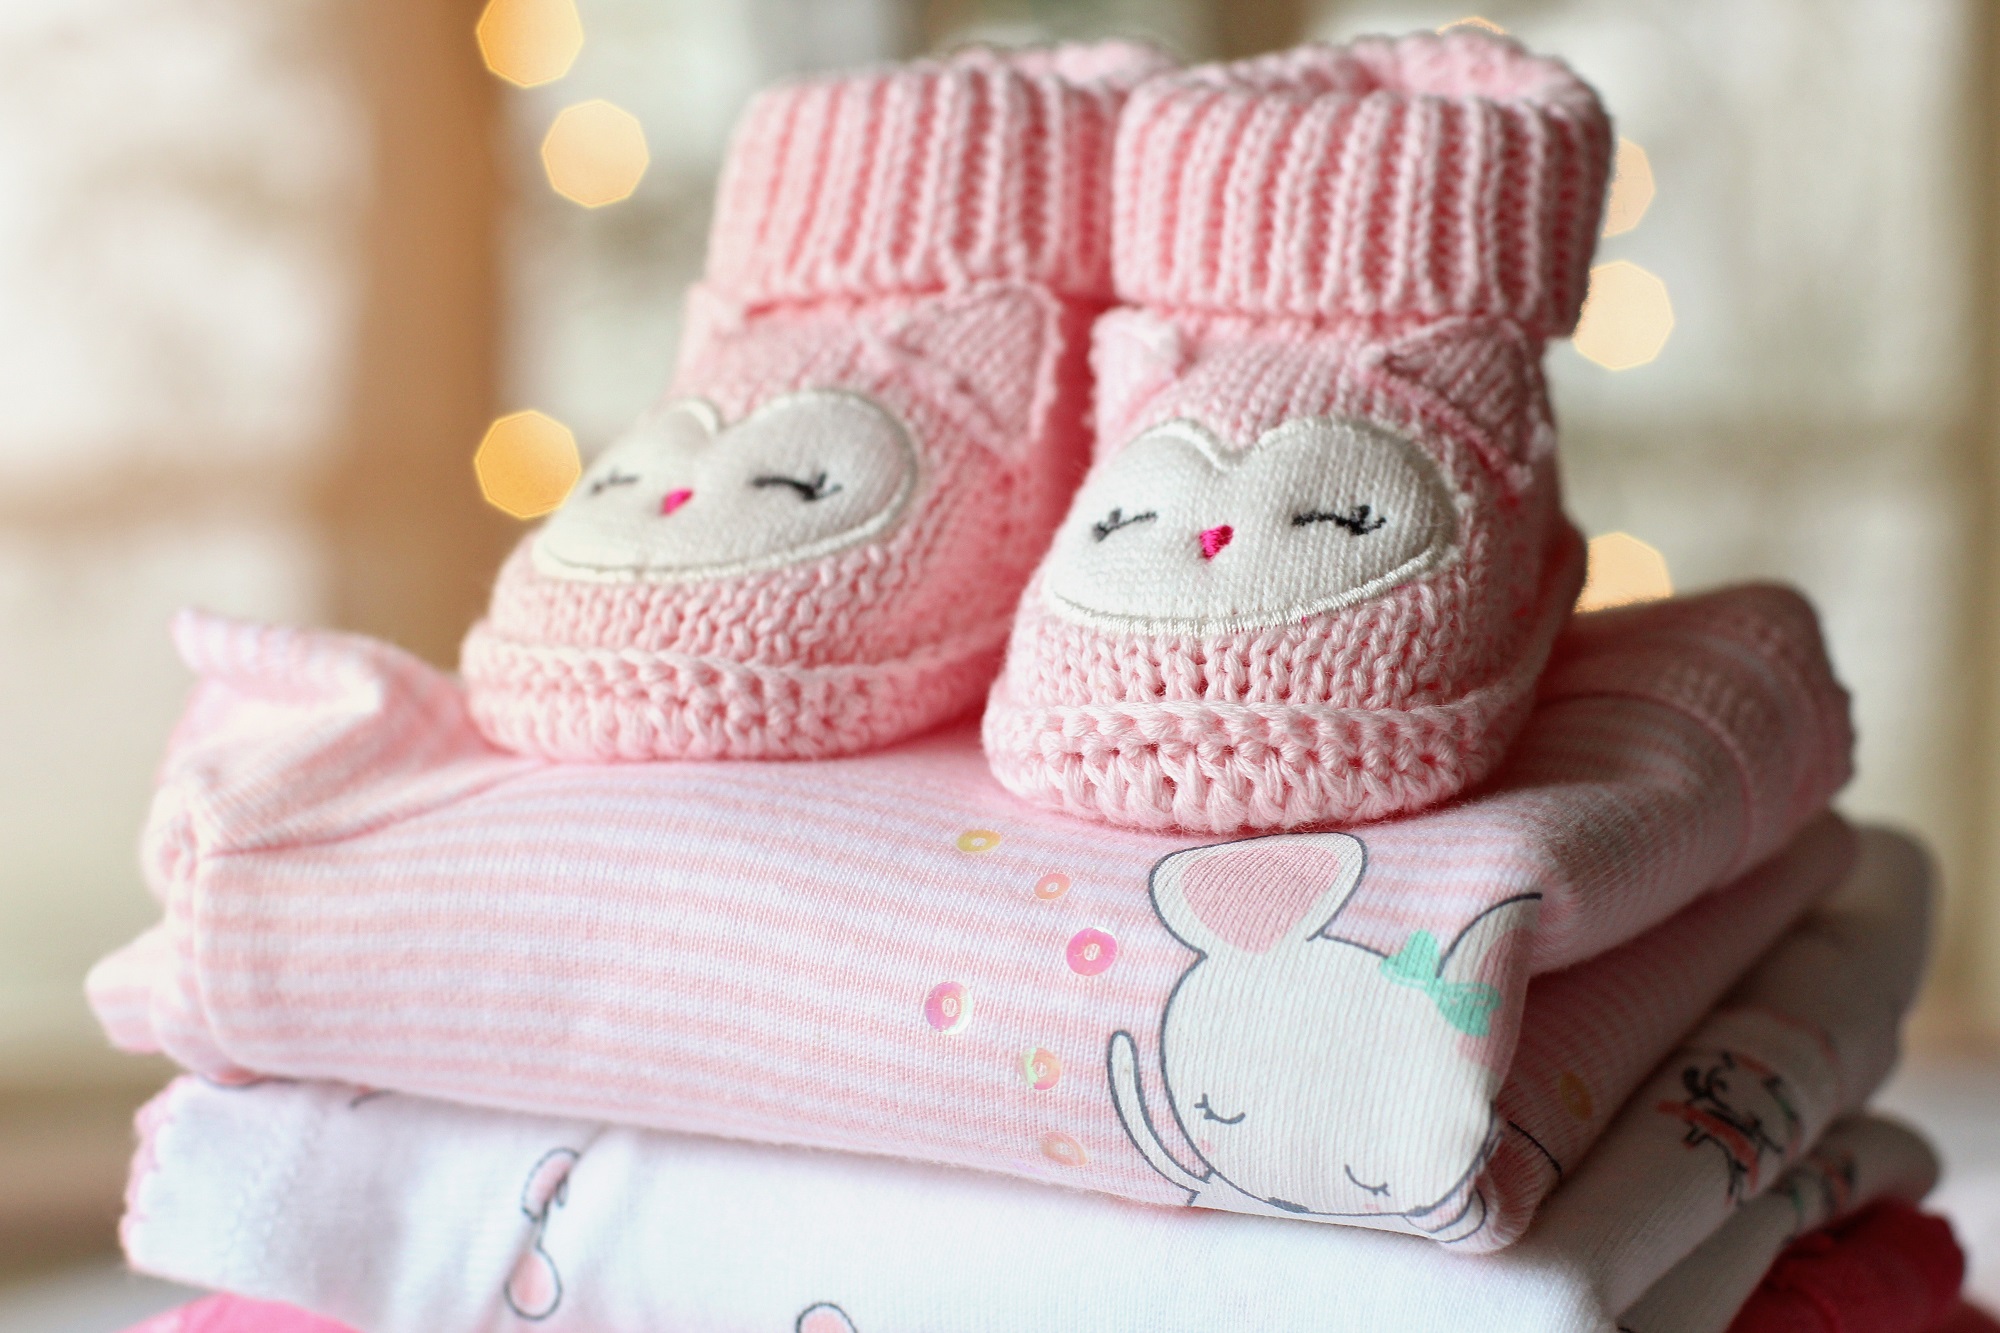 Create a Baby Layette for a New Mom & Deliver to a Pregnancy Medical Clinic